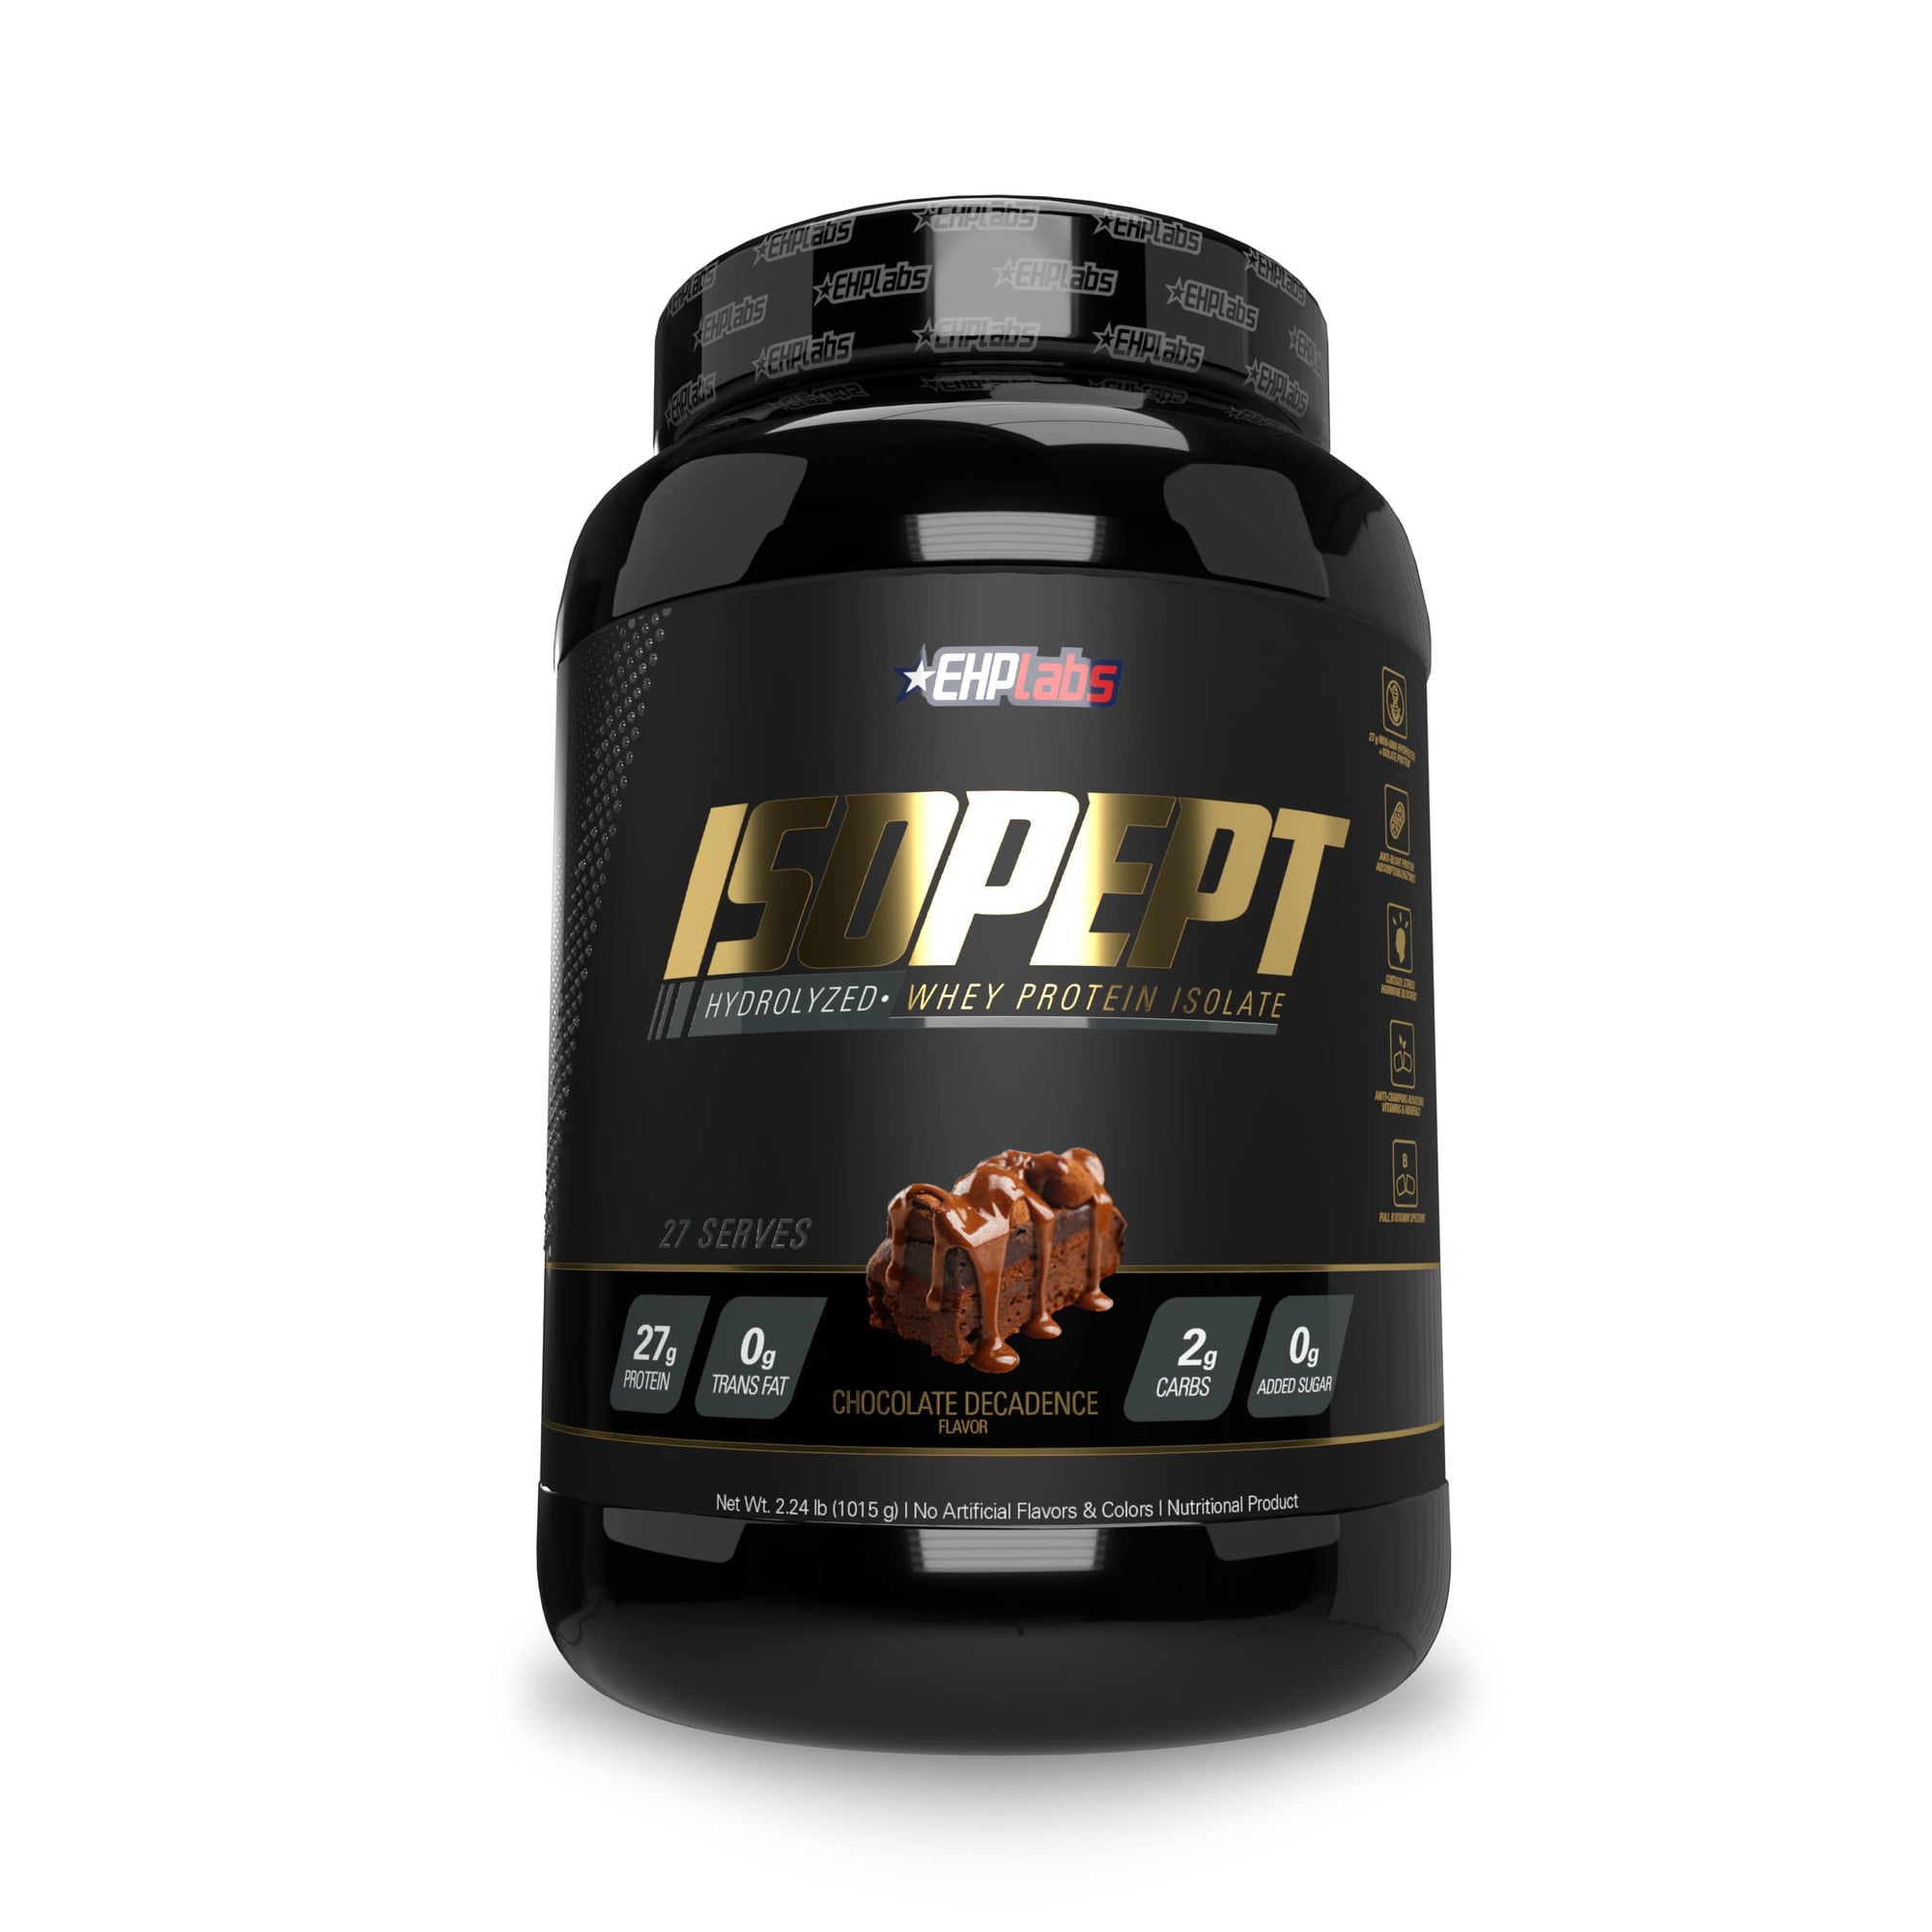 Fitness Hero pesents IsoPept by EHP Labs, Looking for the ultimate post-workout protein that doesn’t compromise on taste or quality? Introducing the new and improved IsoPept Hydrolysed Whey Protein. EHP Labs  also added digestive enzymes along with alkalising vitamins and minerals to take your protein game up to new heights!